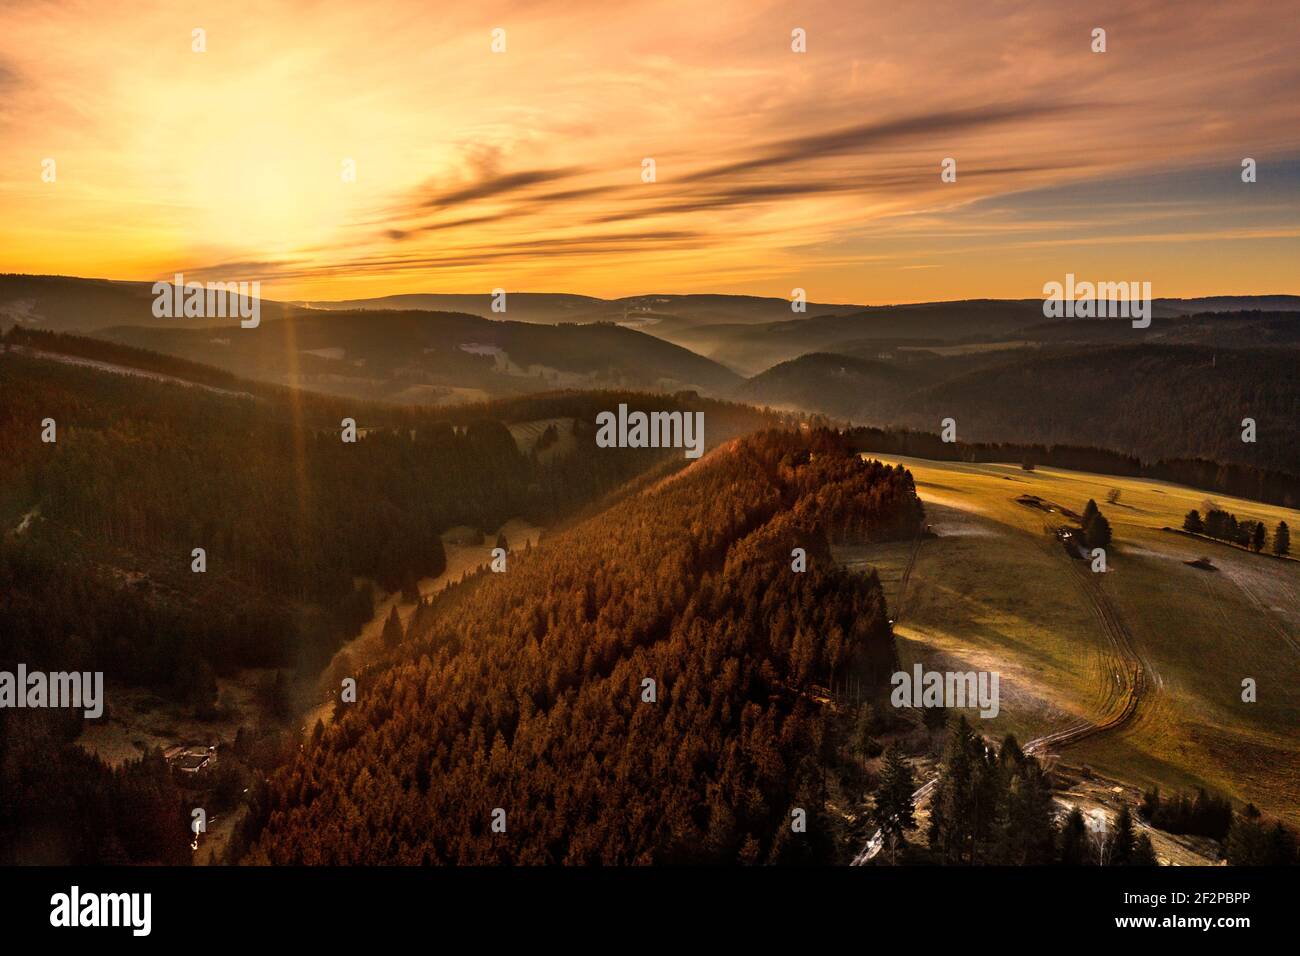 Germany, Thringen, town of Schwarzatal, Meuselbach-Schwarzmhle, landscape, forest, mountains, evening light, overview Stock Photo